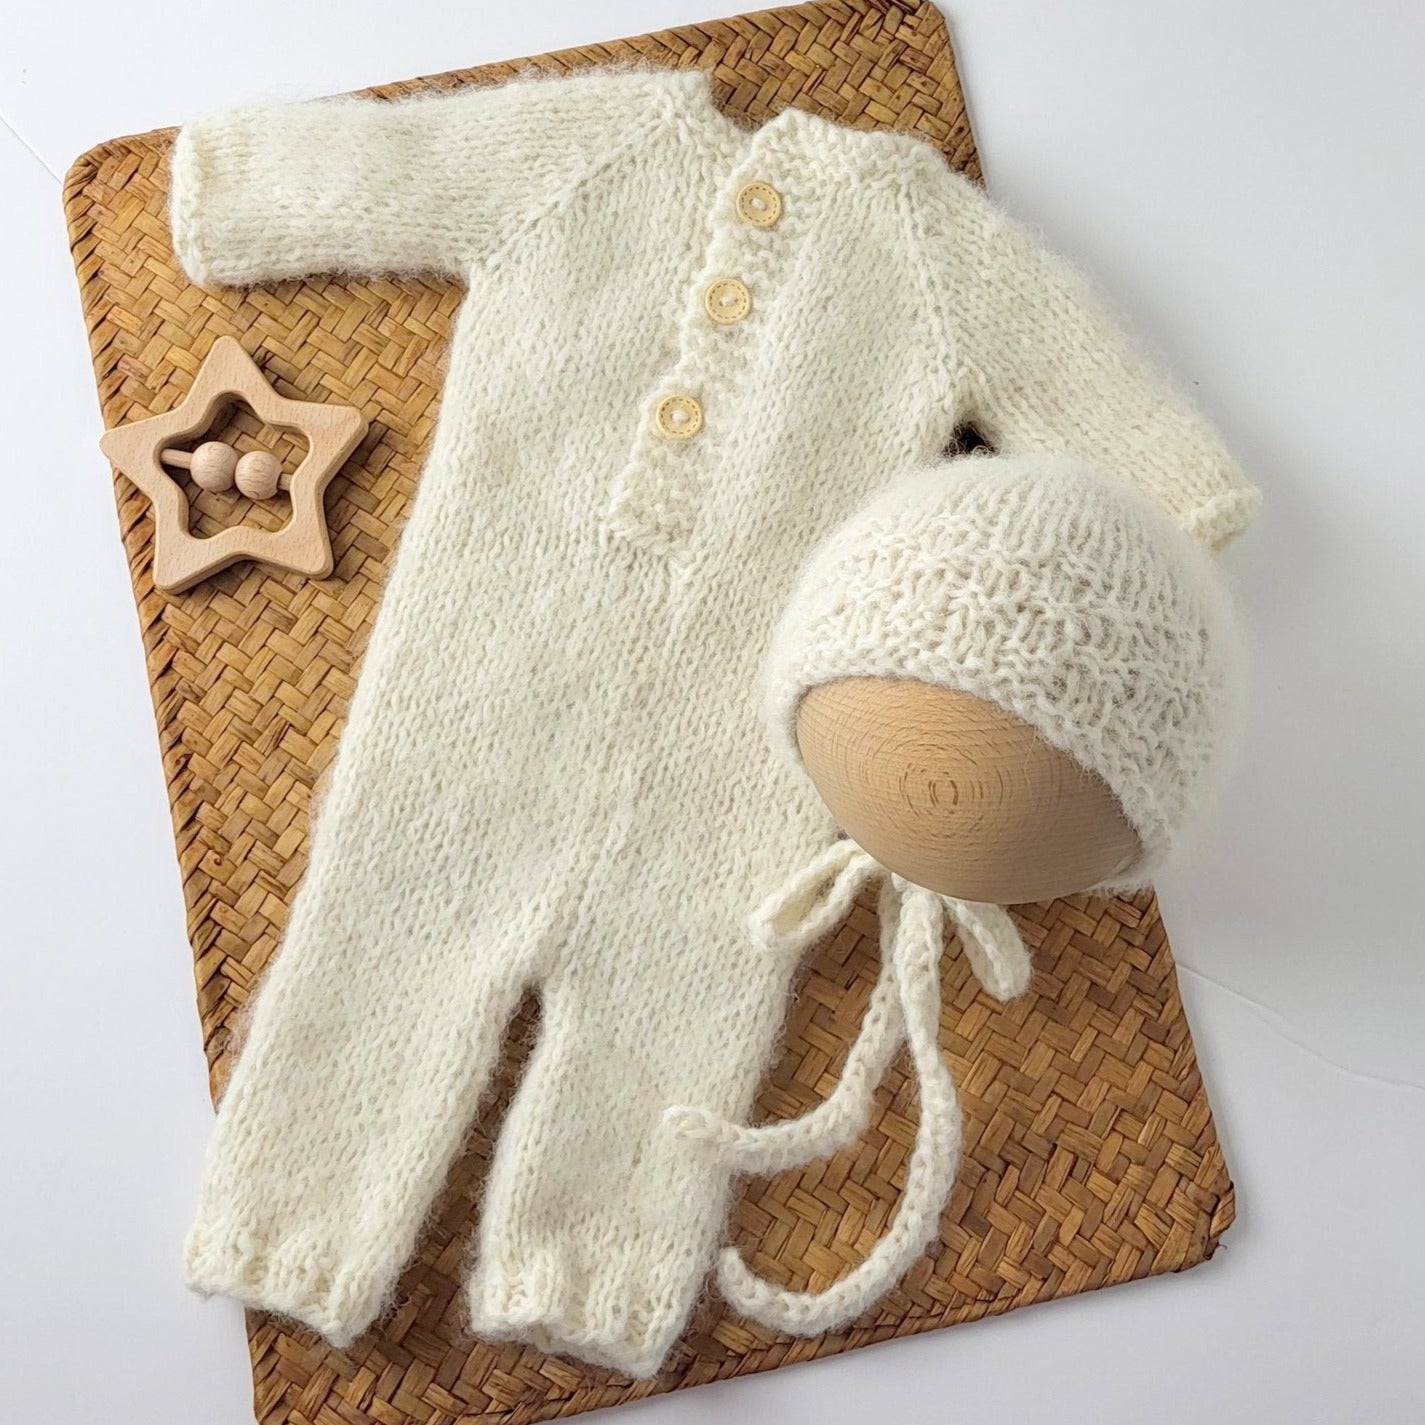 cream knitted newborn rompe with long sleeves, buttons down the front, and classic style bonnet